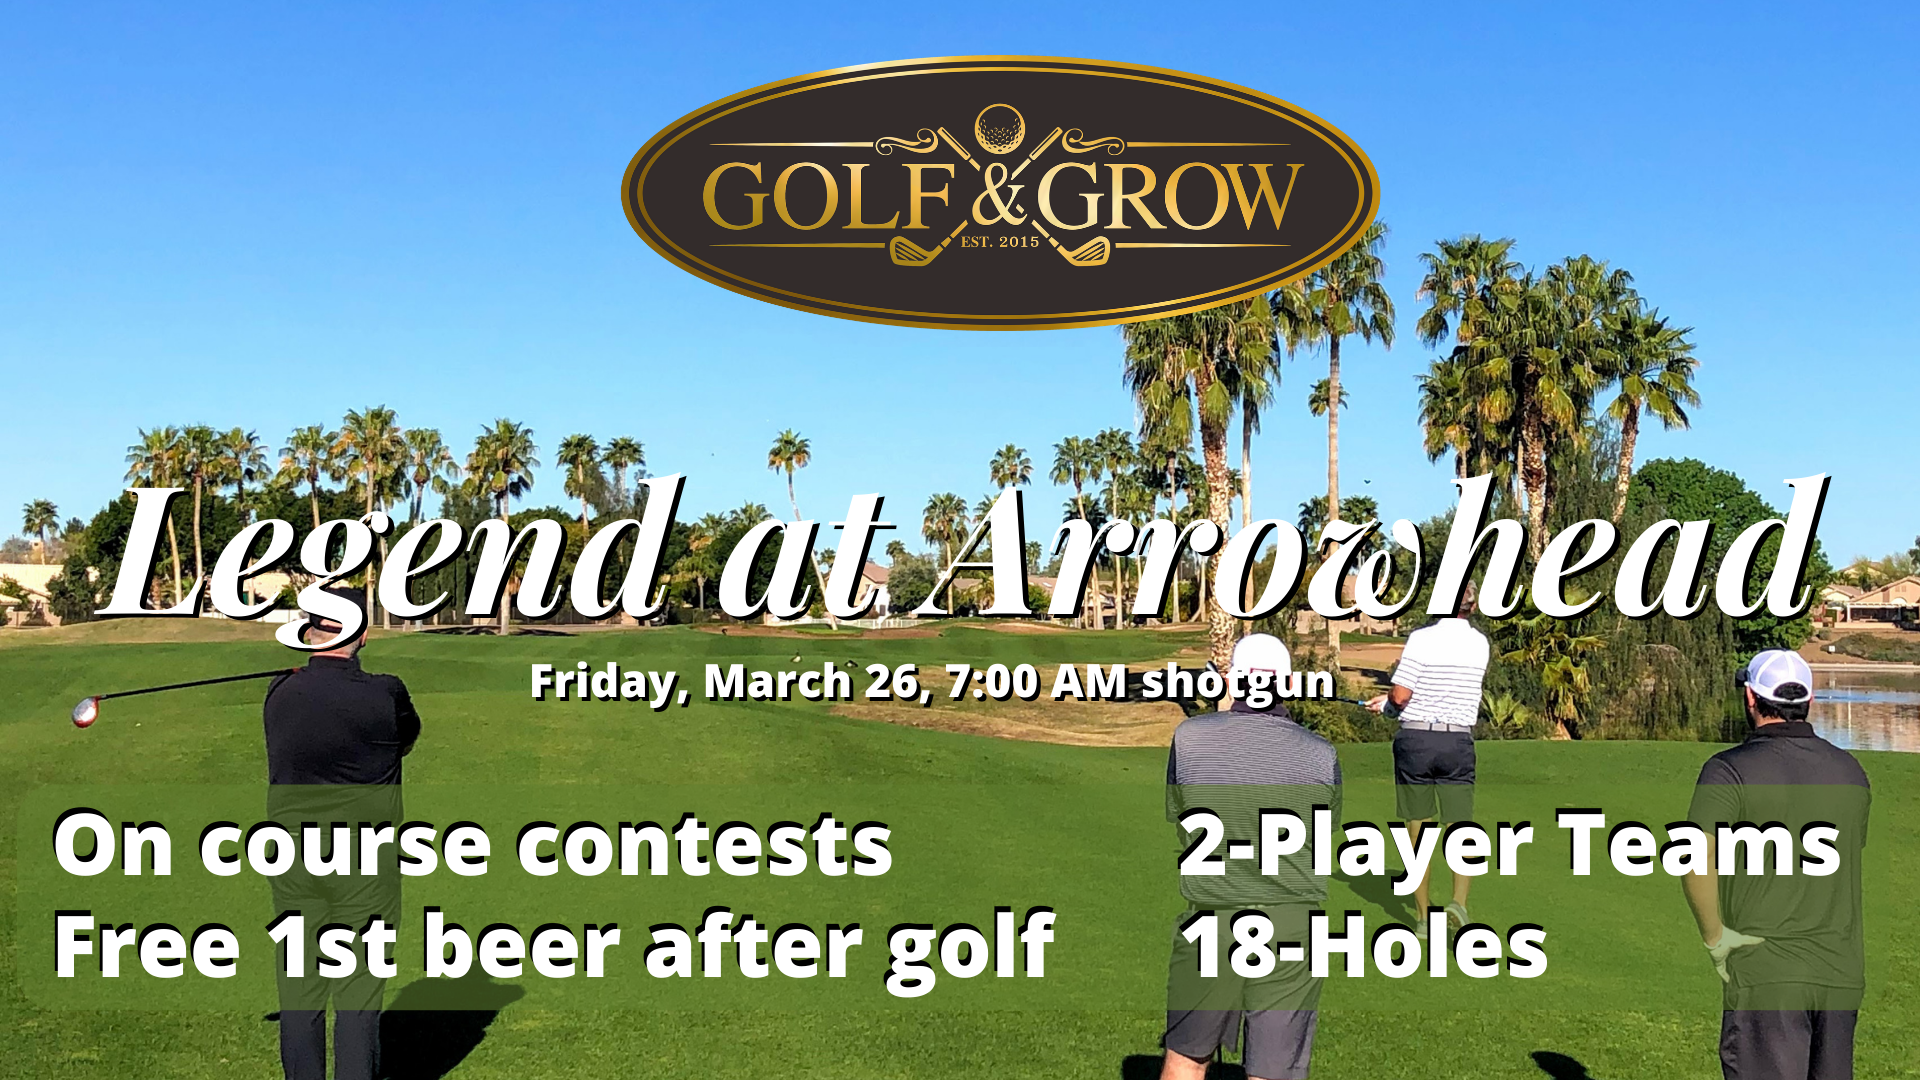 Play in the Golf & Grow golf tournament at Legend at Arrowhead for the best way to network for your business